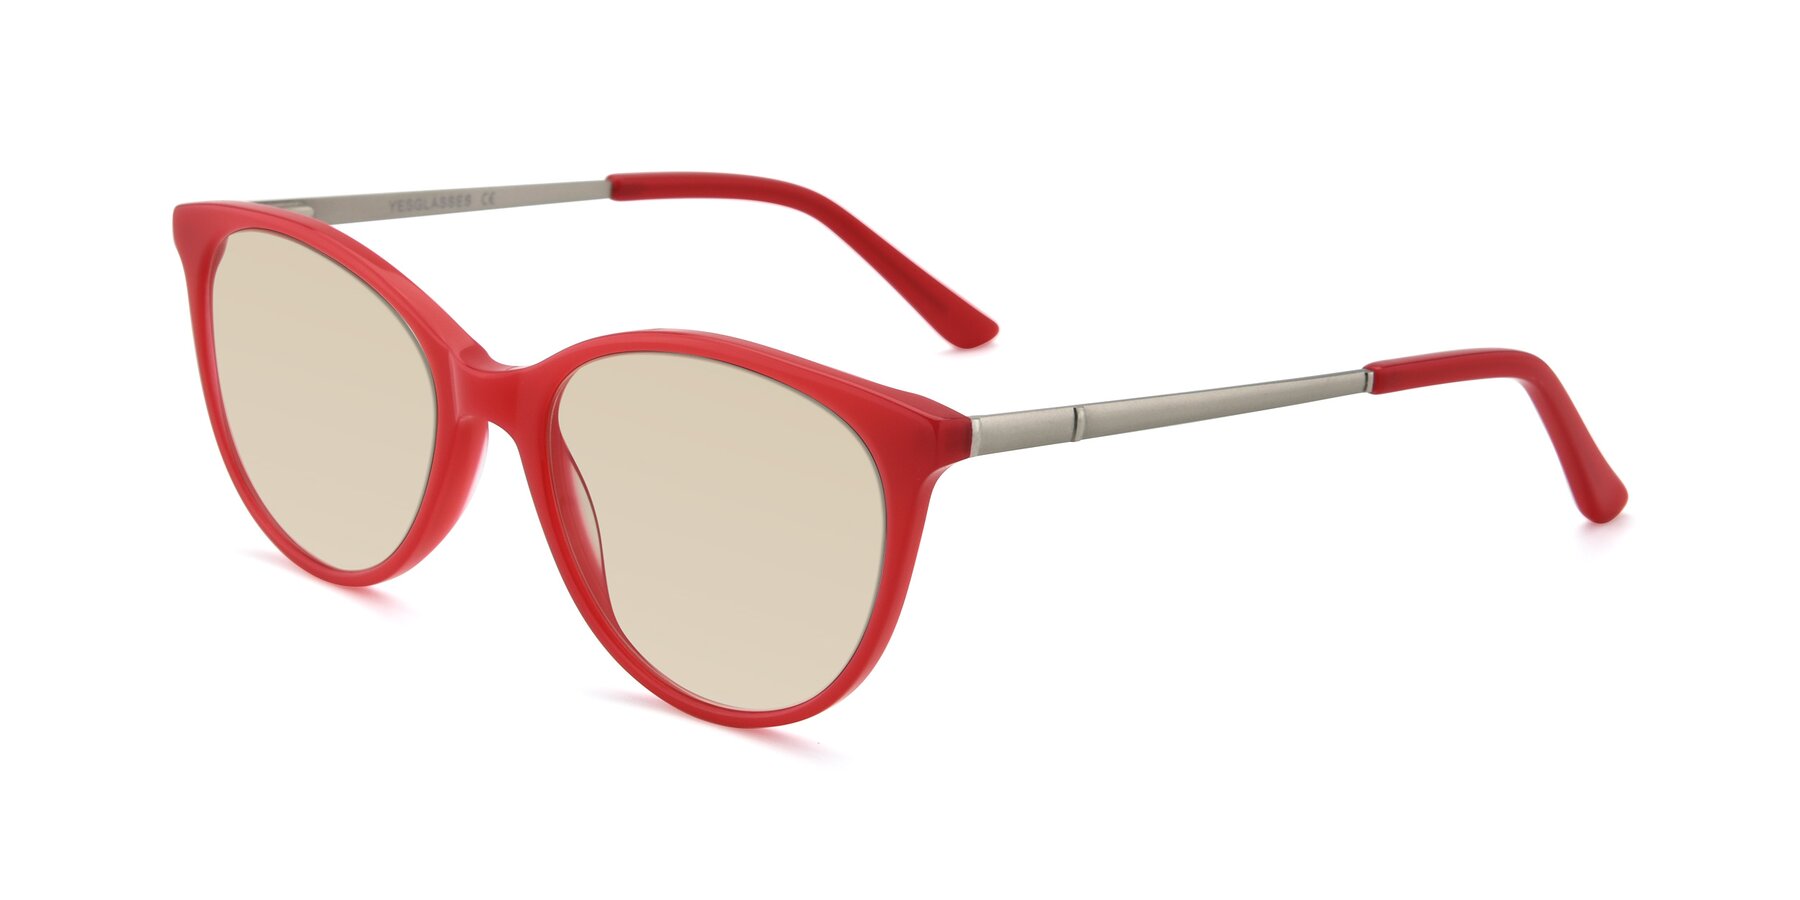 Angle of SR6062 in Rose with Light Brown Tinted Lenses